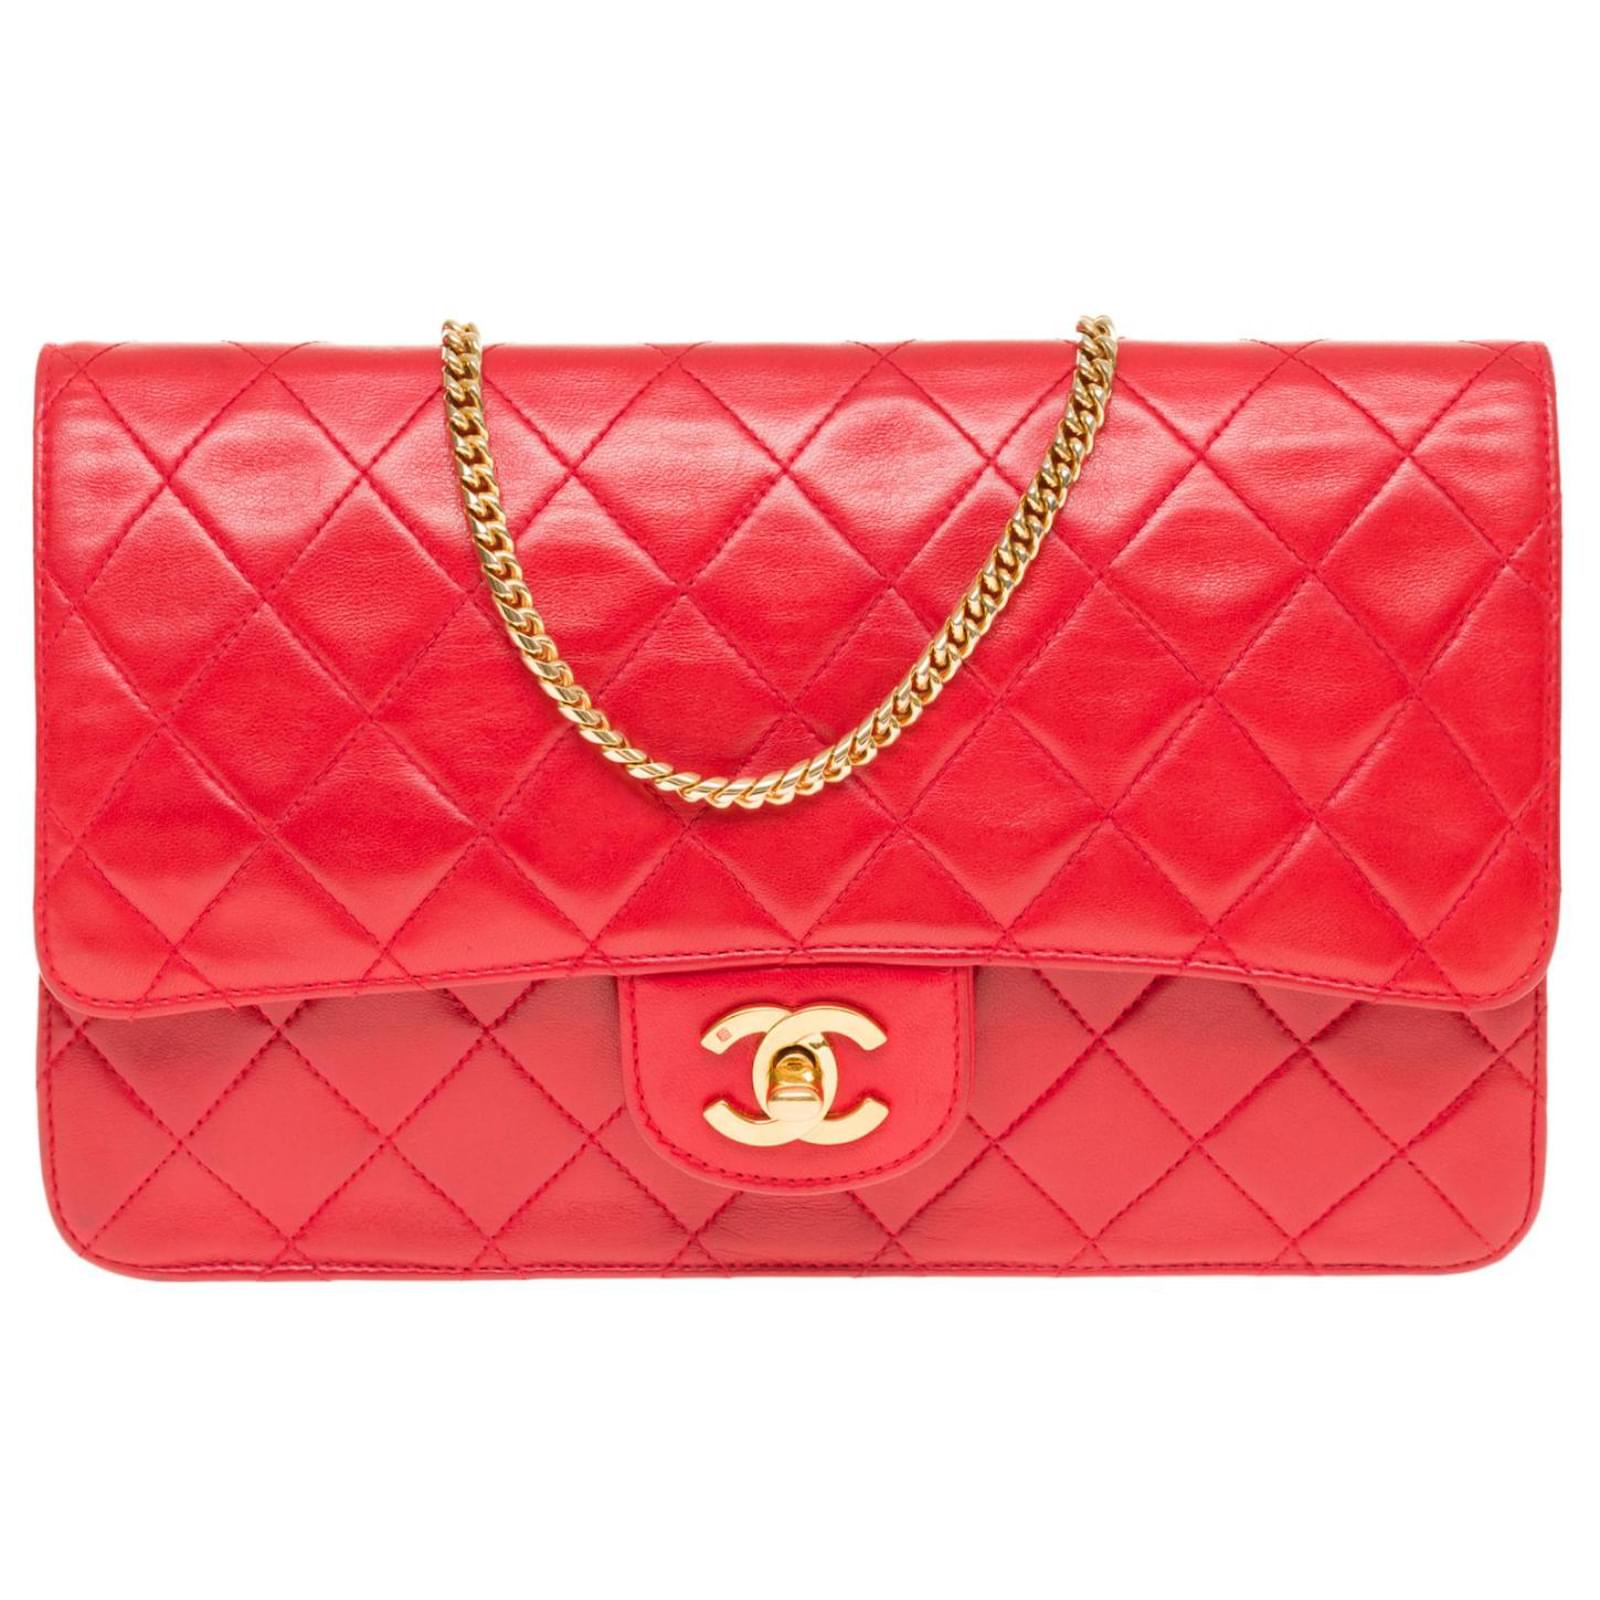 Timeless/classique leather handbag Chanel Red in Leather - 20302302